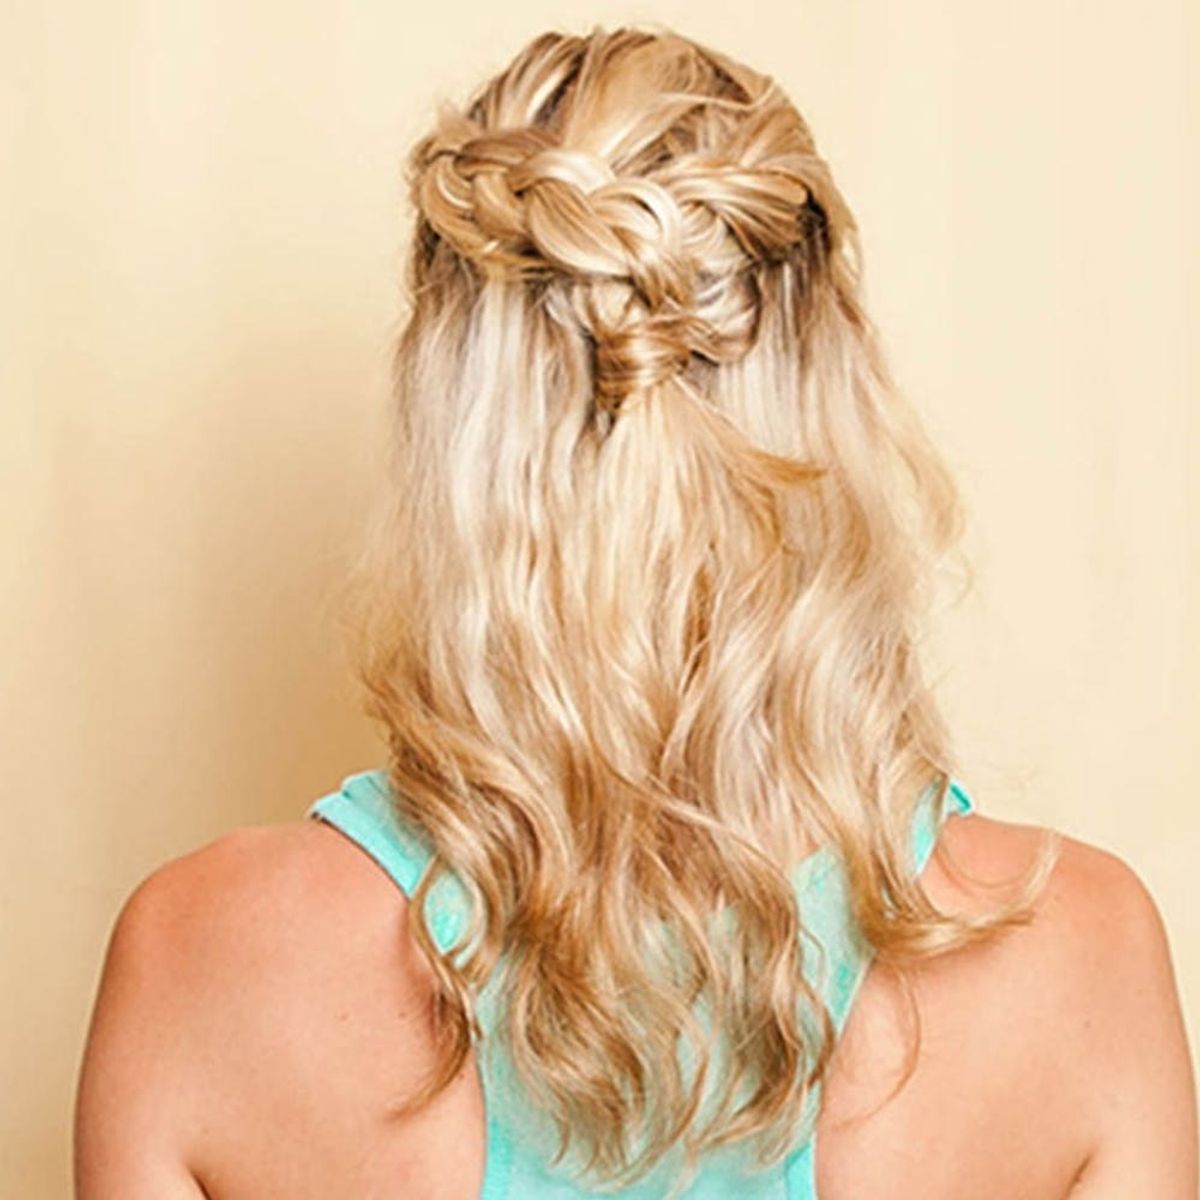 Hack This Half-Up ‘Do With Our Secret Styling Weapon